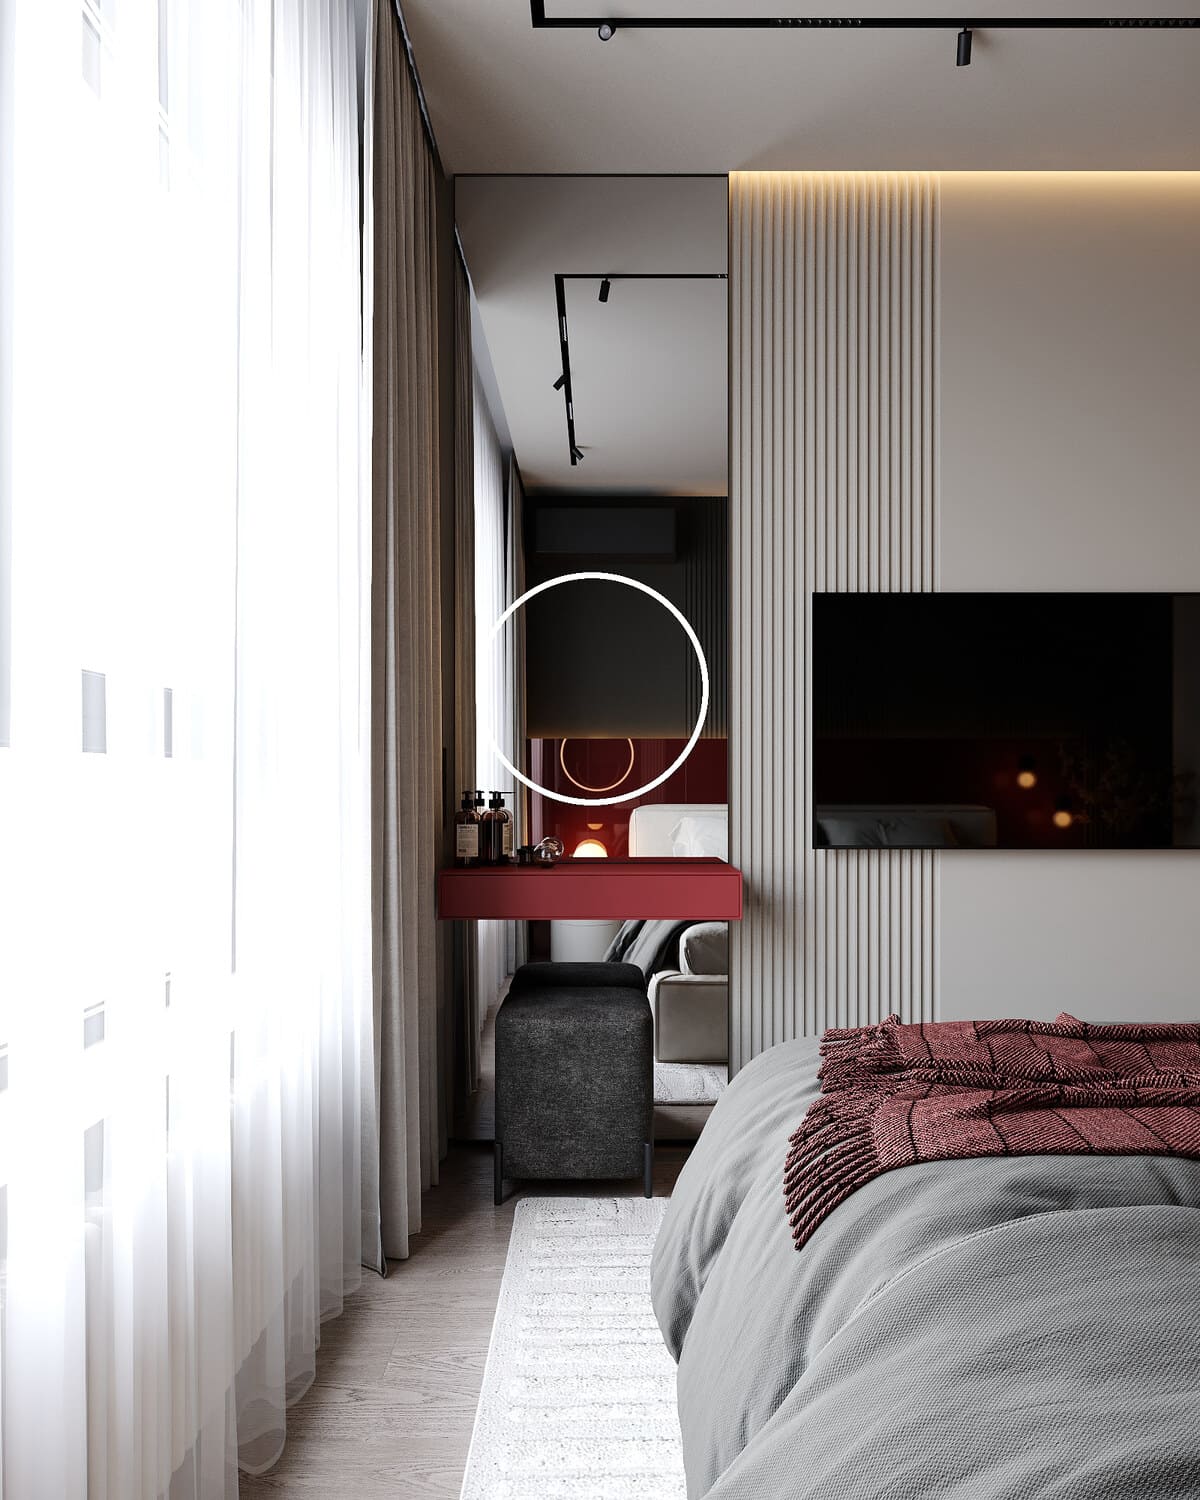 Modern apartment in calm colours, bedroom, photo 40